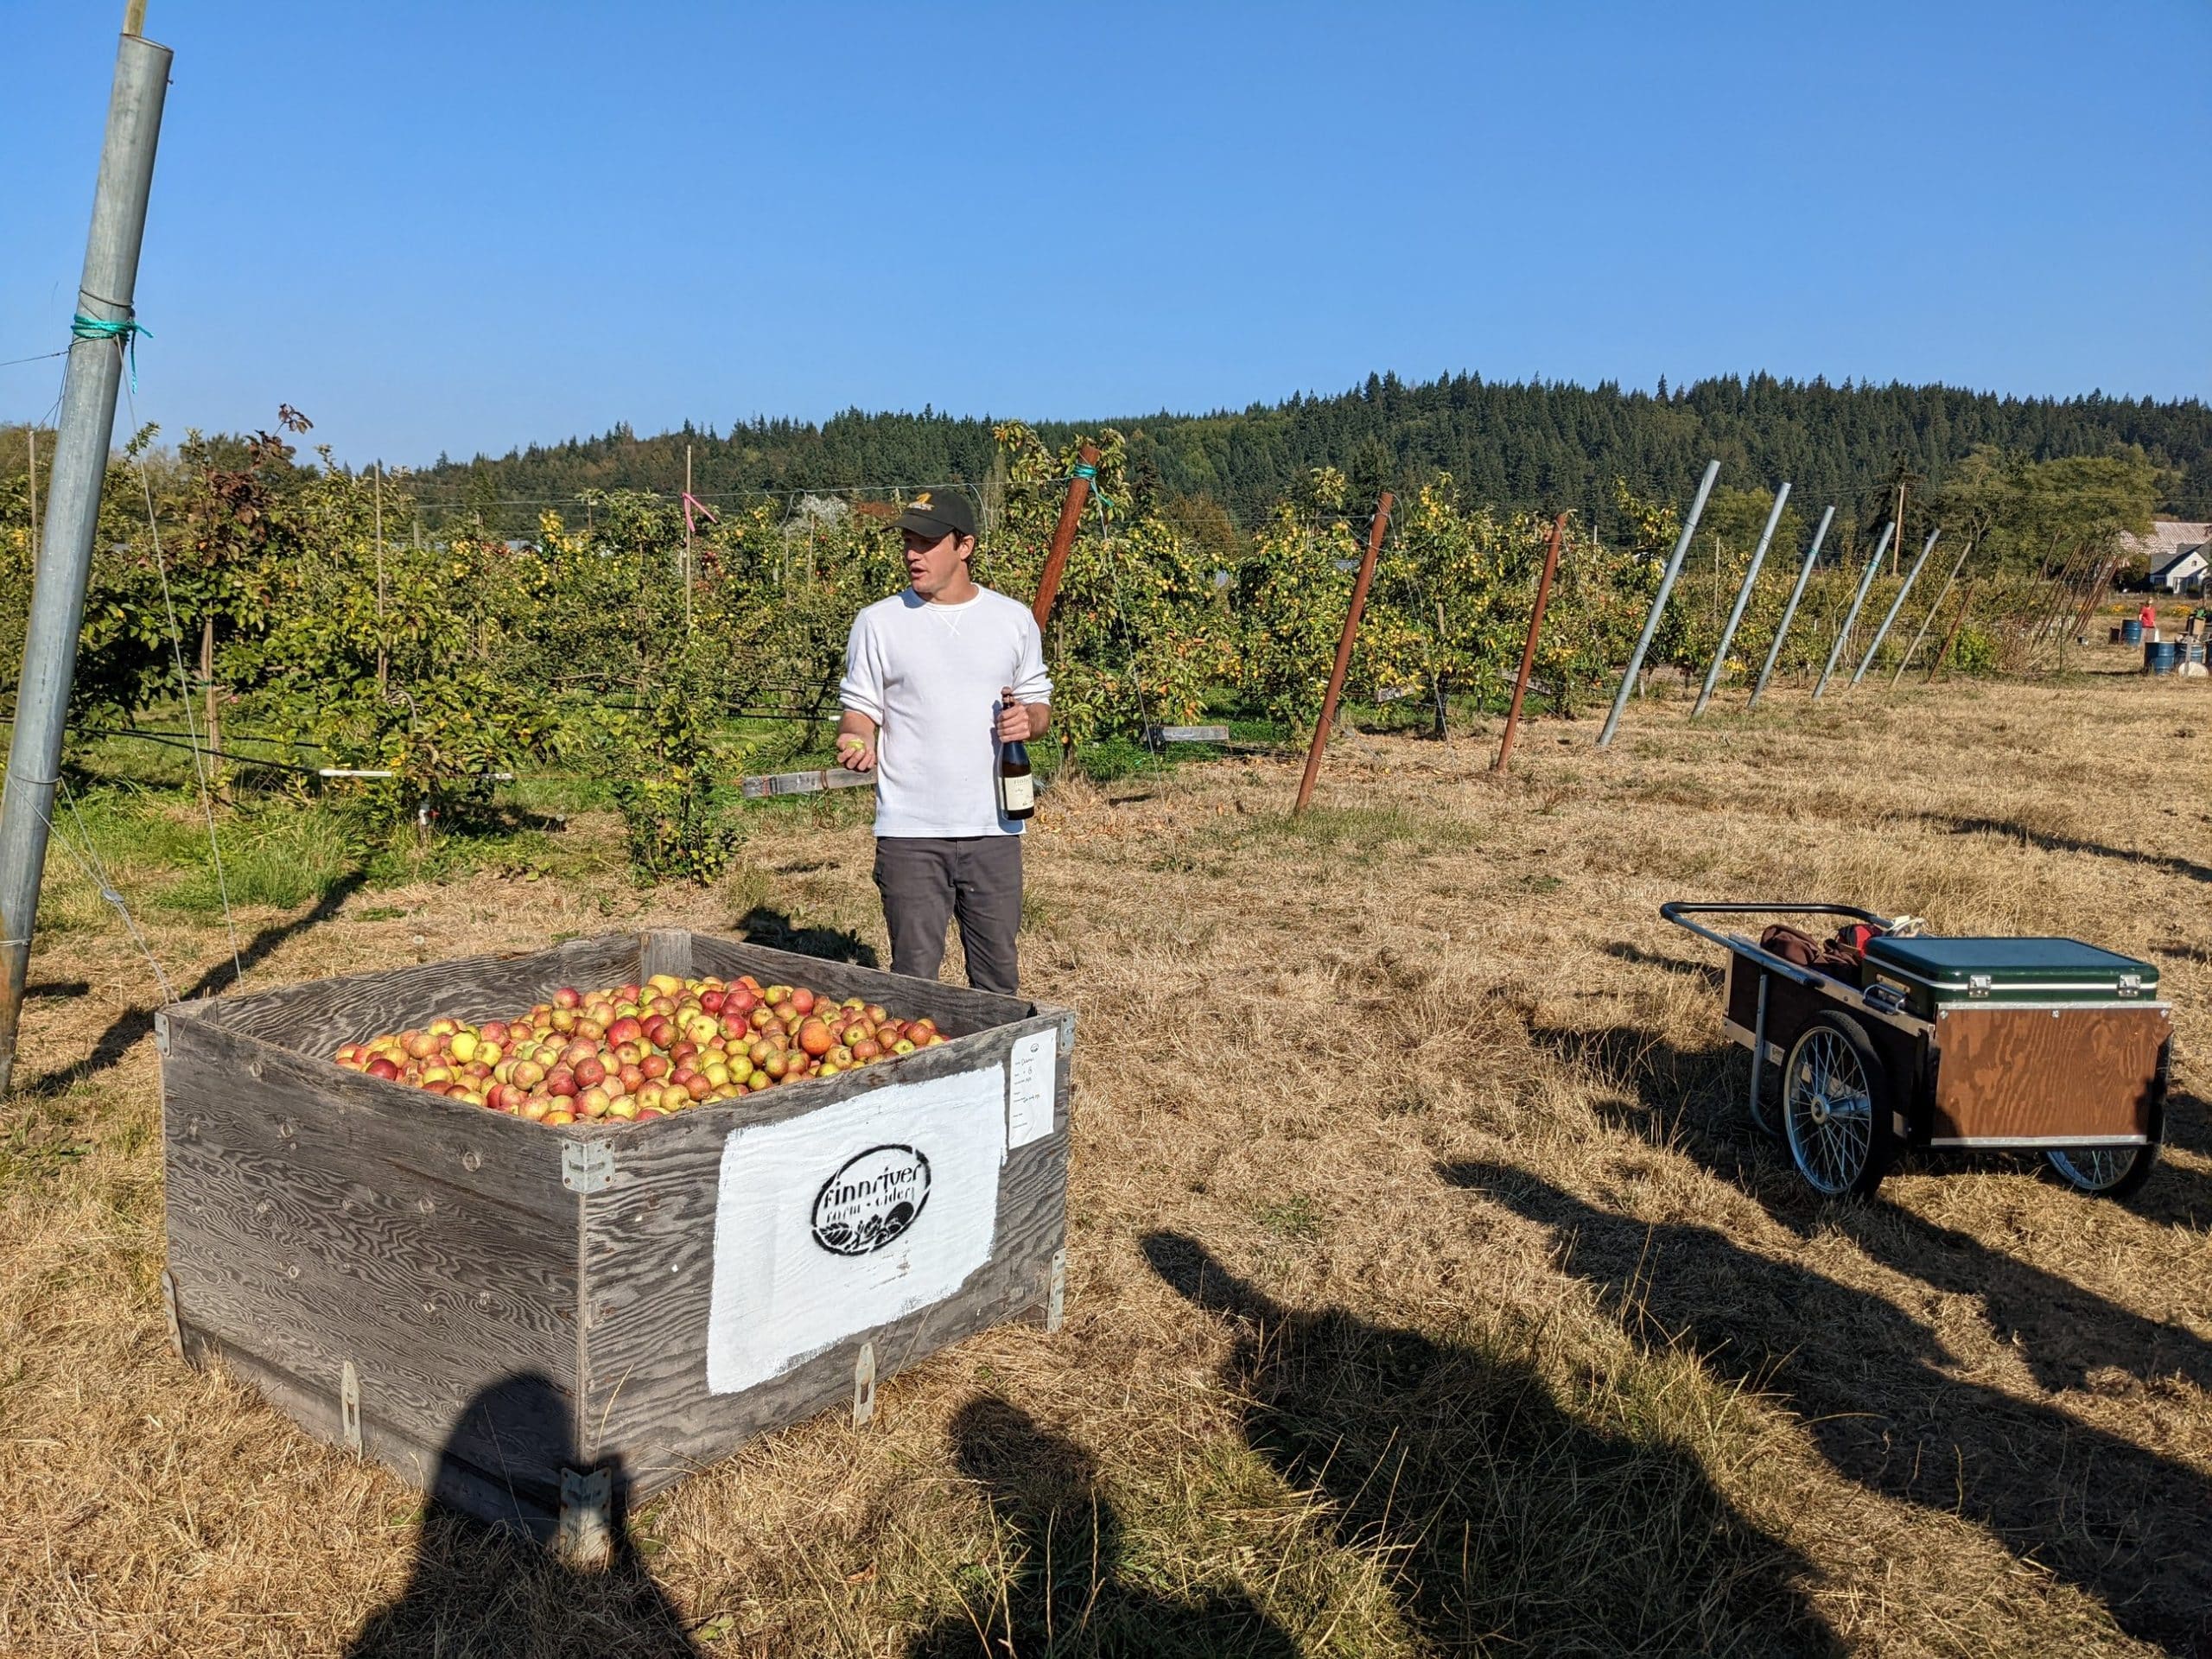 Andrew, head cidermaker at Finnriver, talks about the apples they grow at the cidery